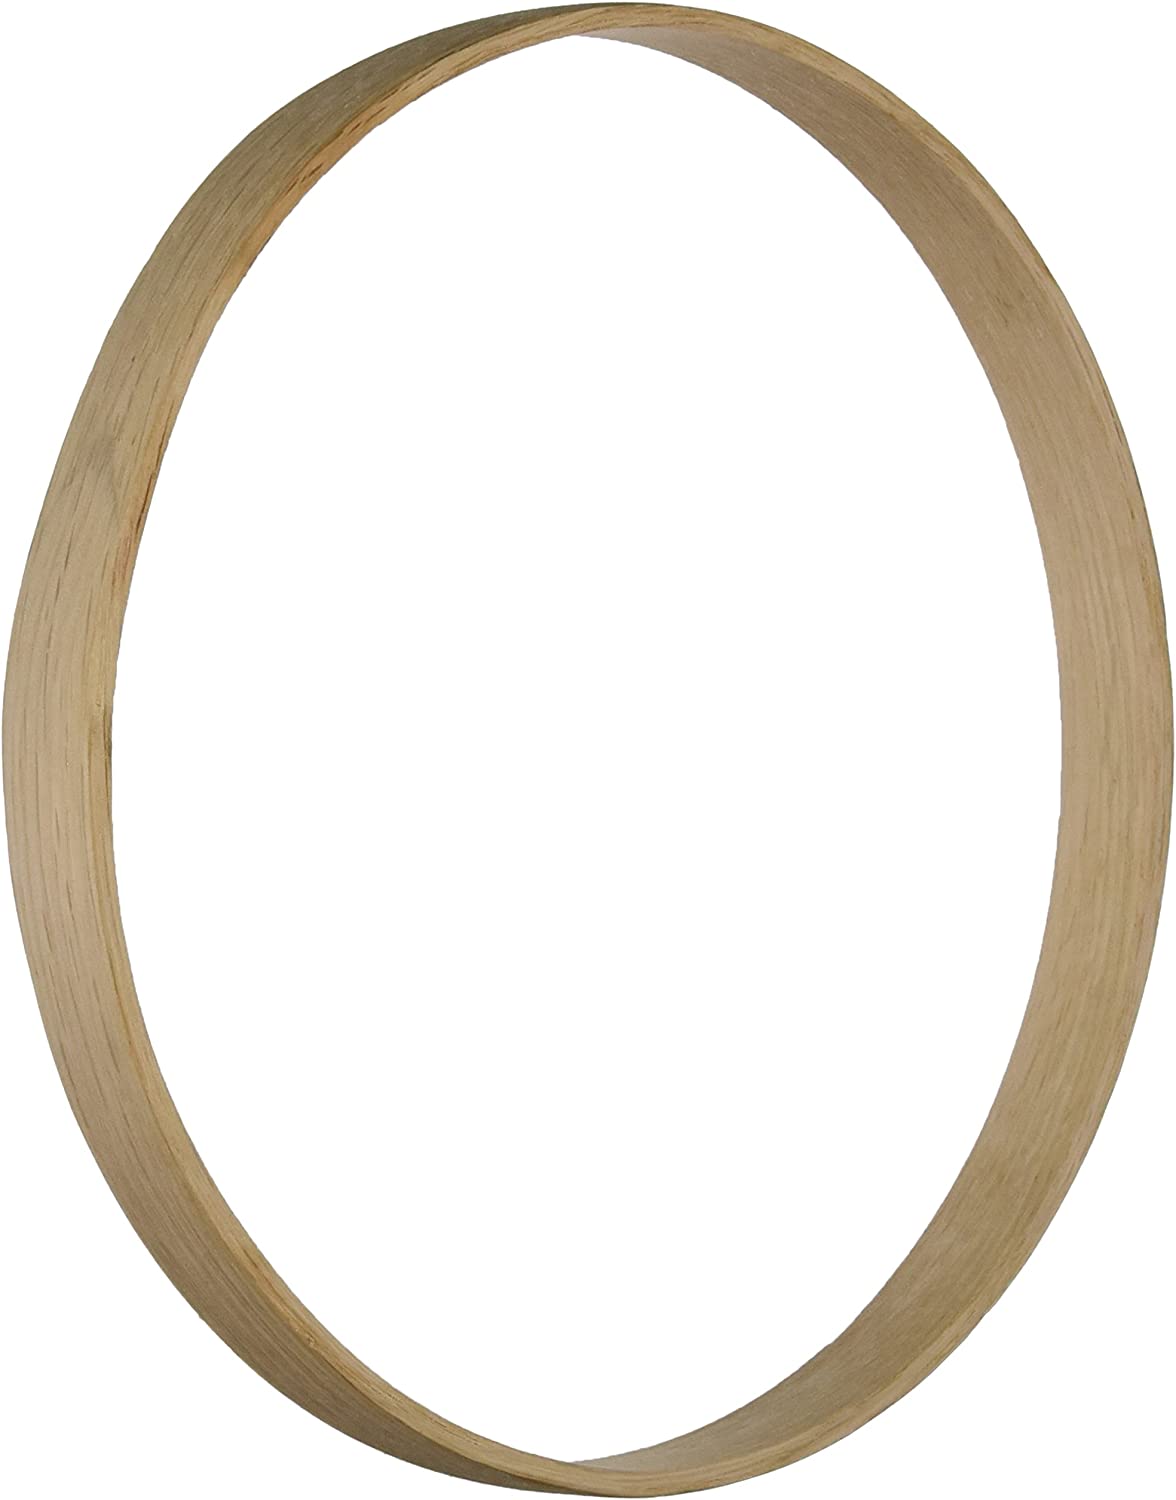 Commonwealth Basket Basketry Round Hoops, 8-Inch by 3/4-Inch Depth